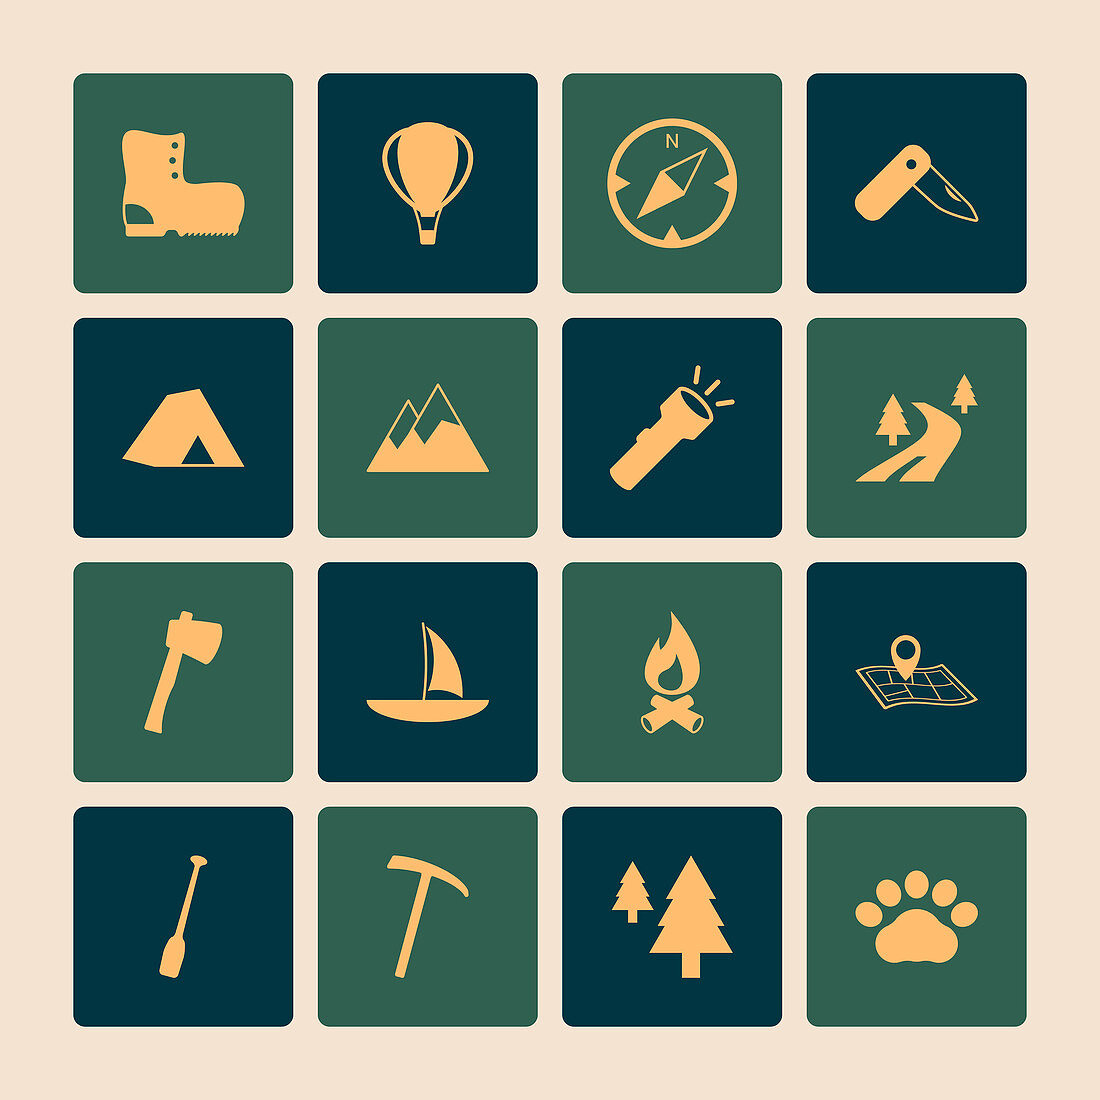 Outdoors tourism camping icons of road mountain tree and nat